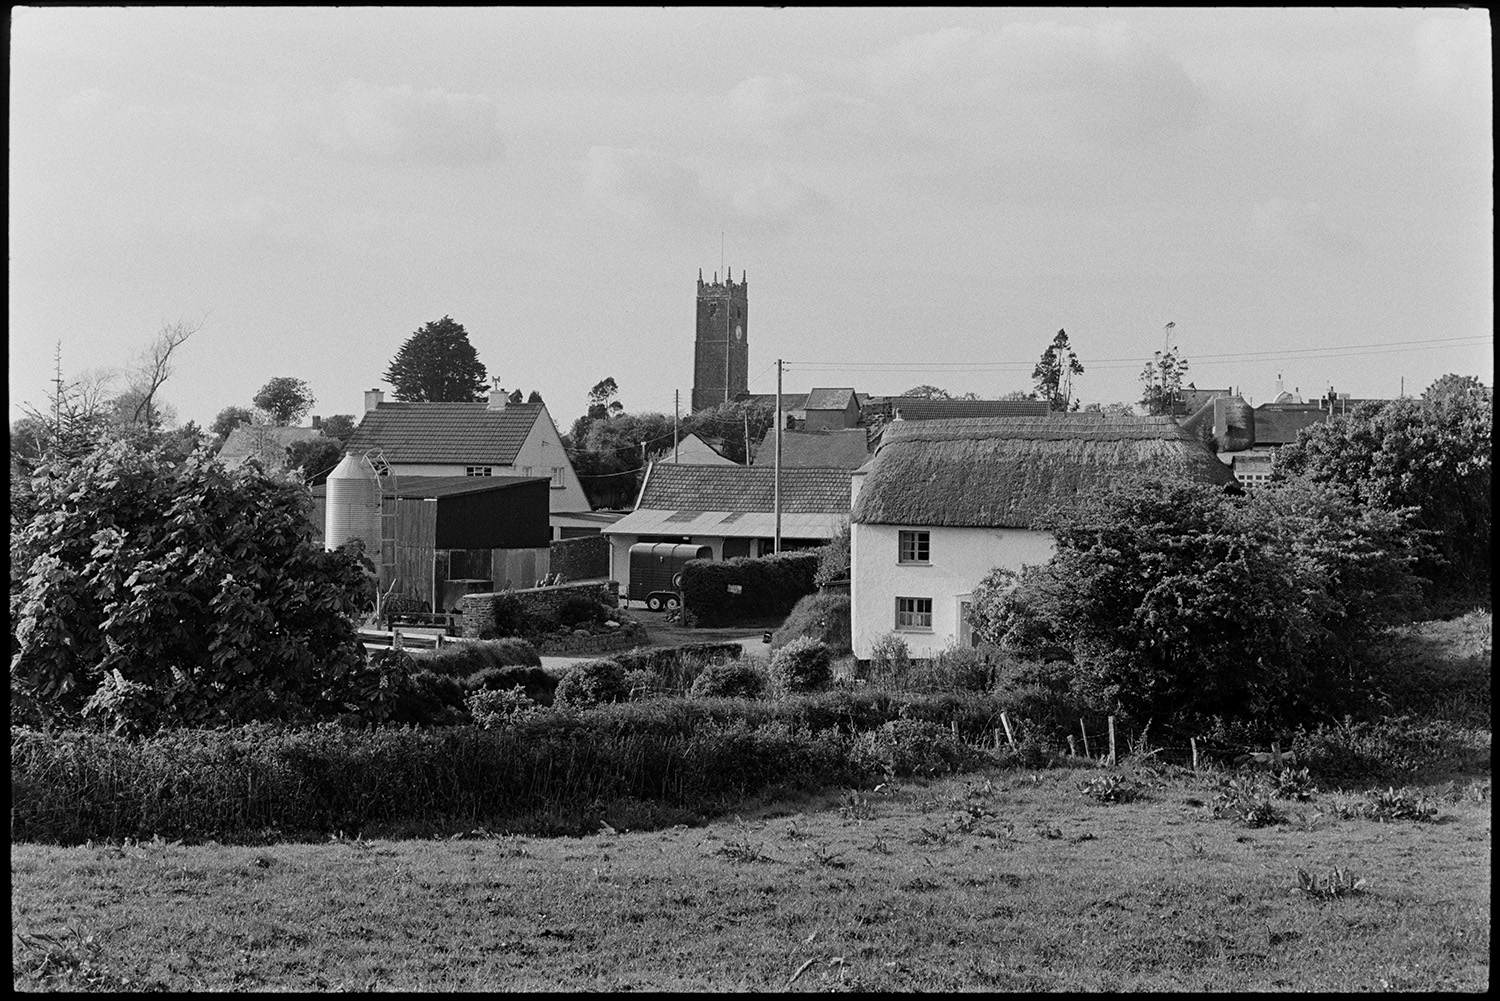 Scenes around village, comparison shots with old photos.
[A scene taken from a field of a thatched cottage and farmyard with a silo and horse box at High Bickington. The church tower is visible in the background.]